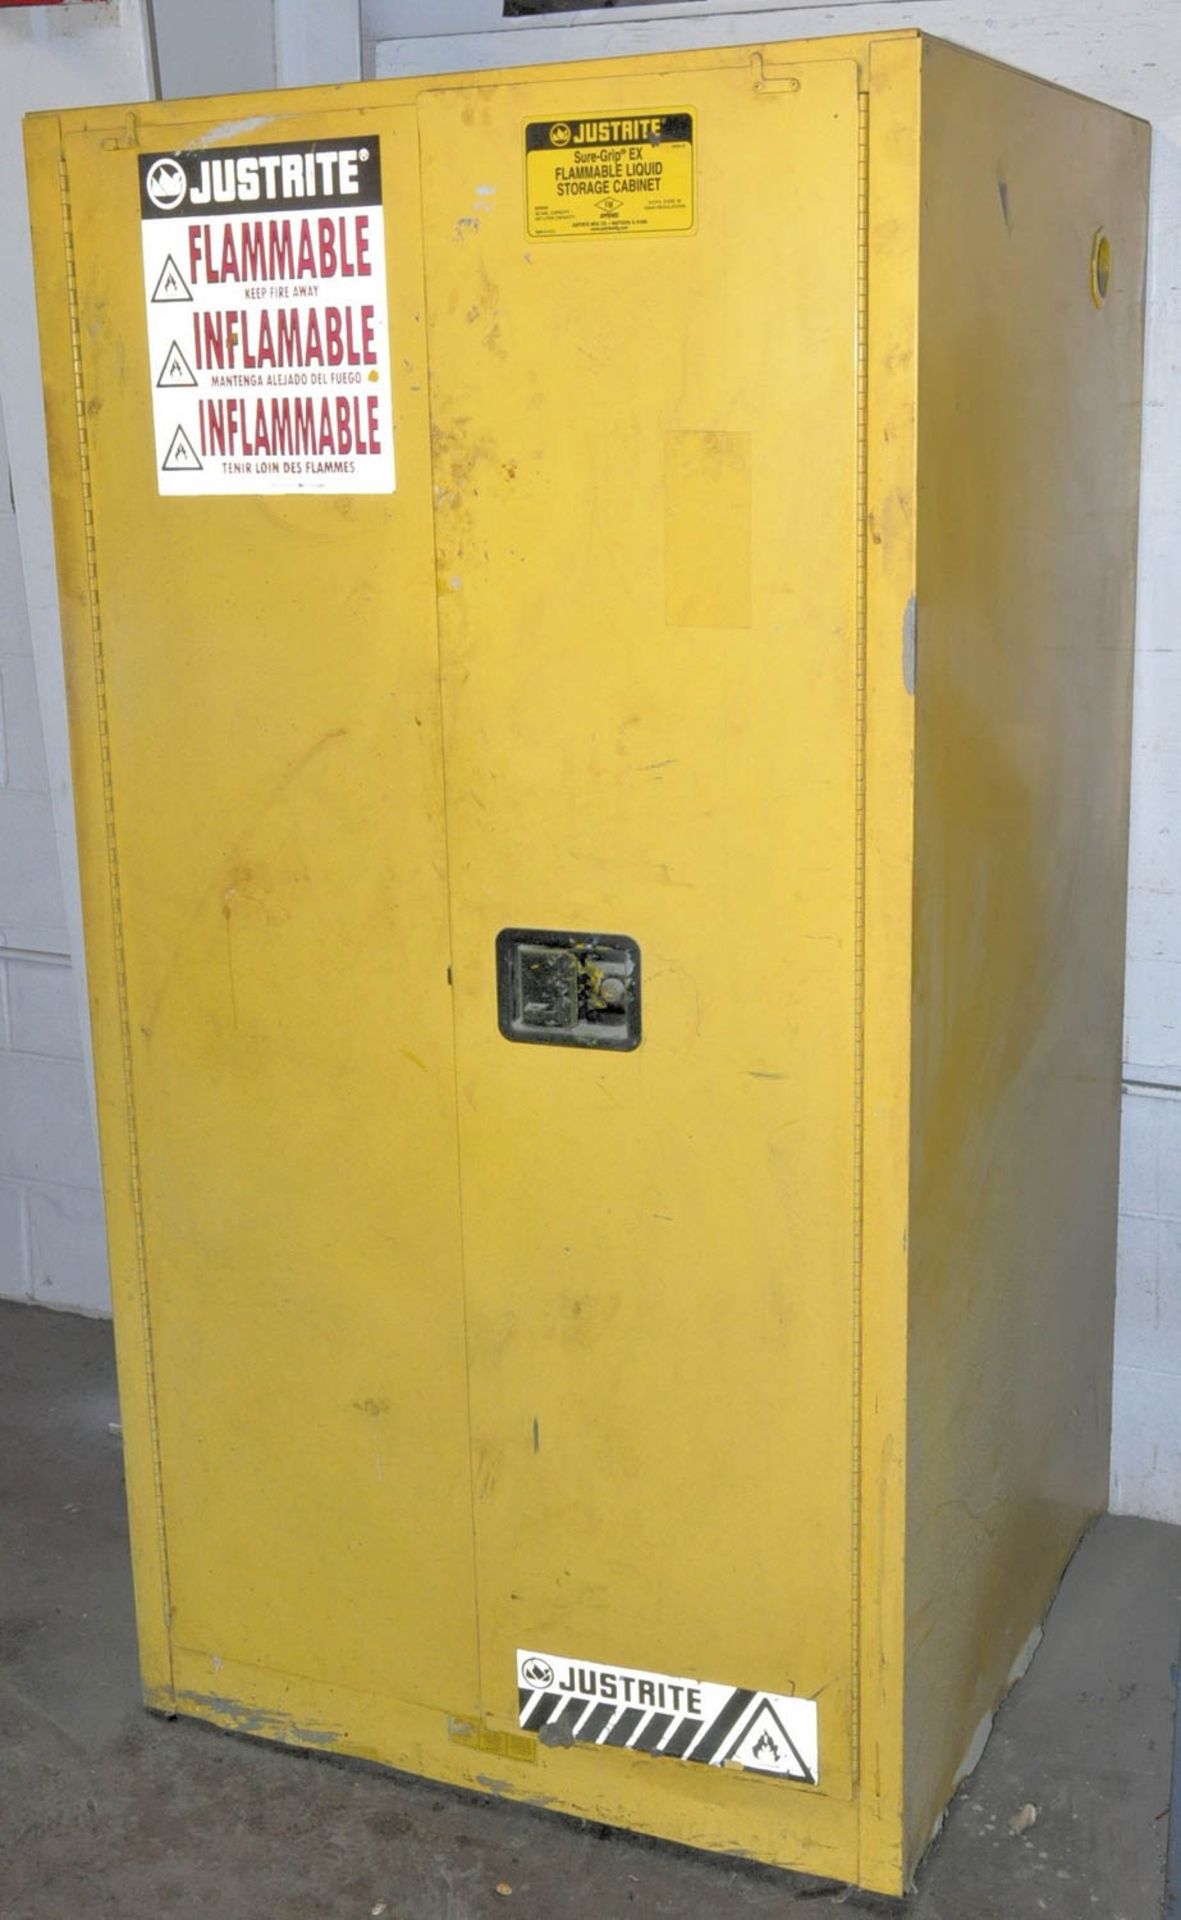 JUSTRITE 34" X 34" X 66"H 2-DOOR FLAMMABLE SAFETY CABINET WITH CONTENTS